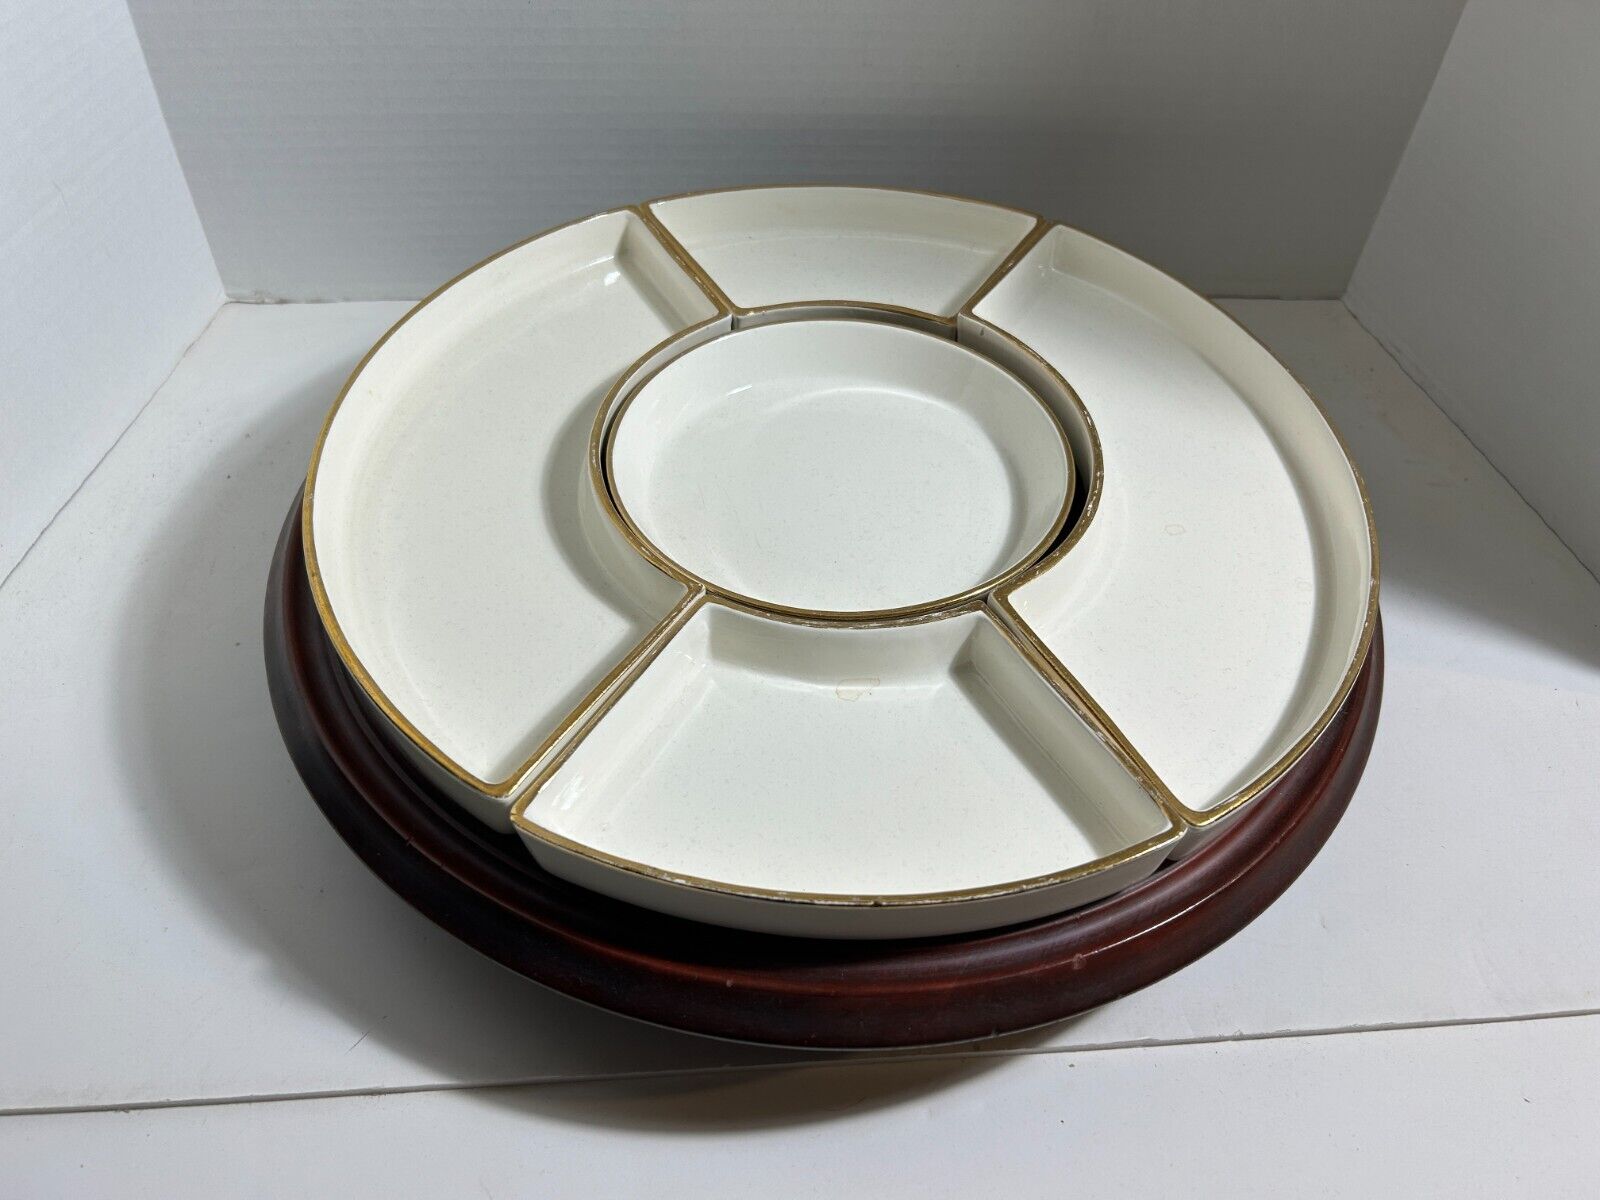 German, vintage Lazy Susan, wood rotating stand, 5 Porcelain Dishes  1930s-40s